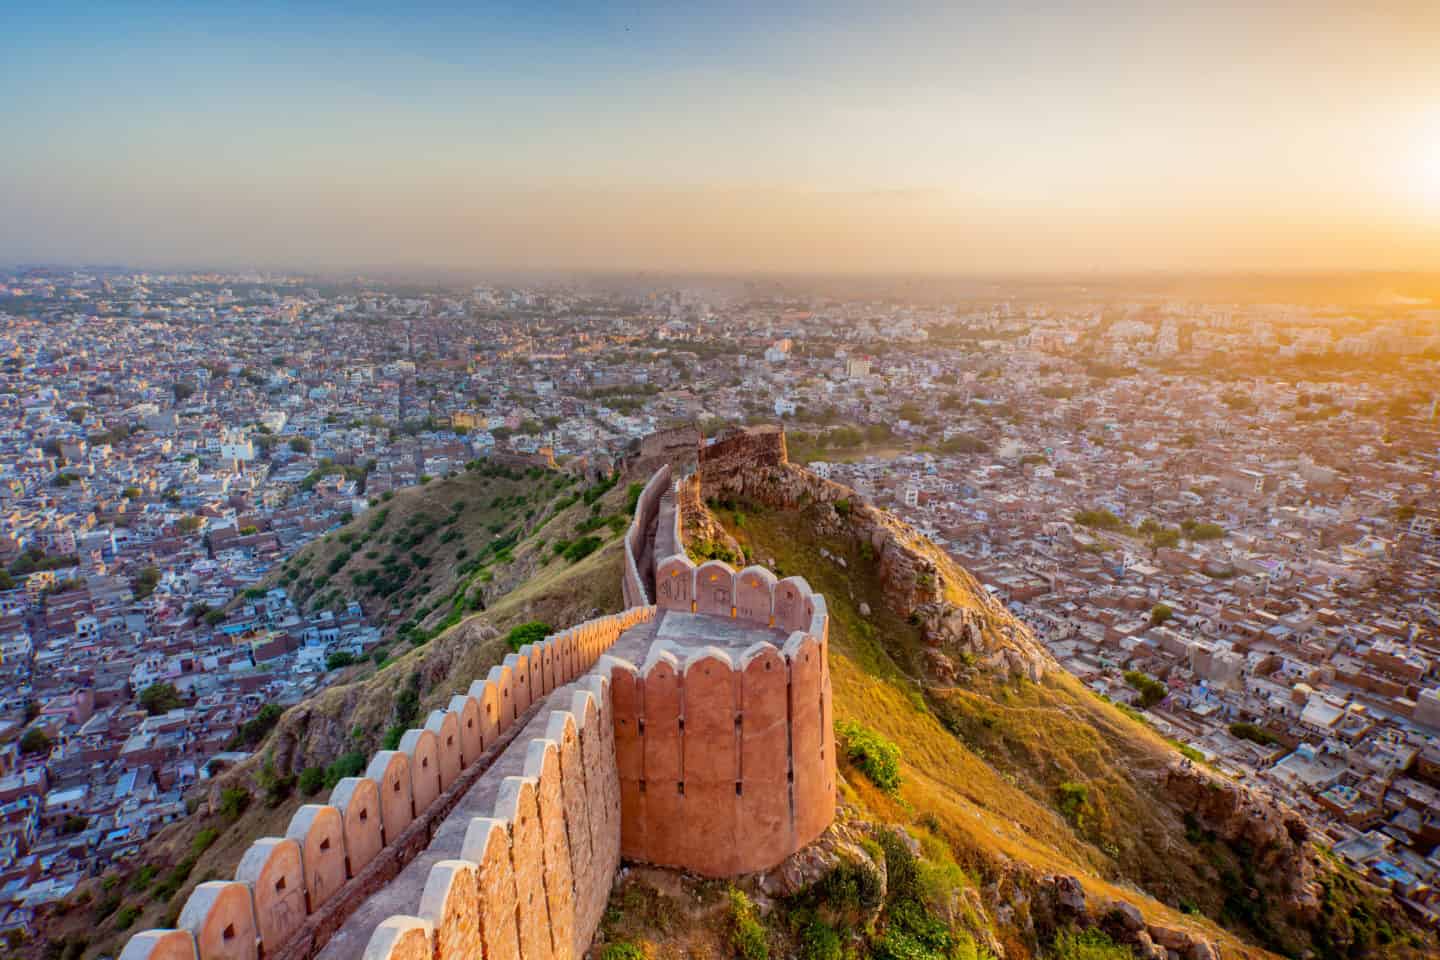 Places to visit in Jaipur | Aerial view of Jaipur from Nahargarh Fort at sunset